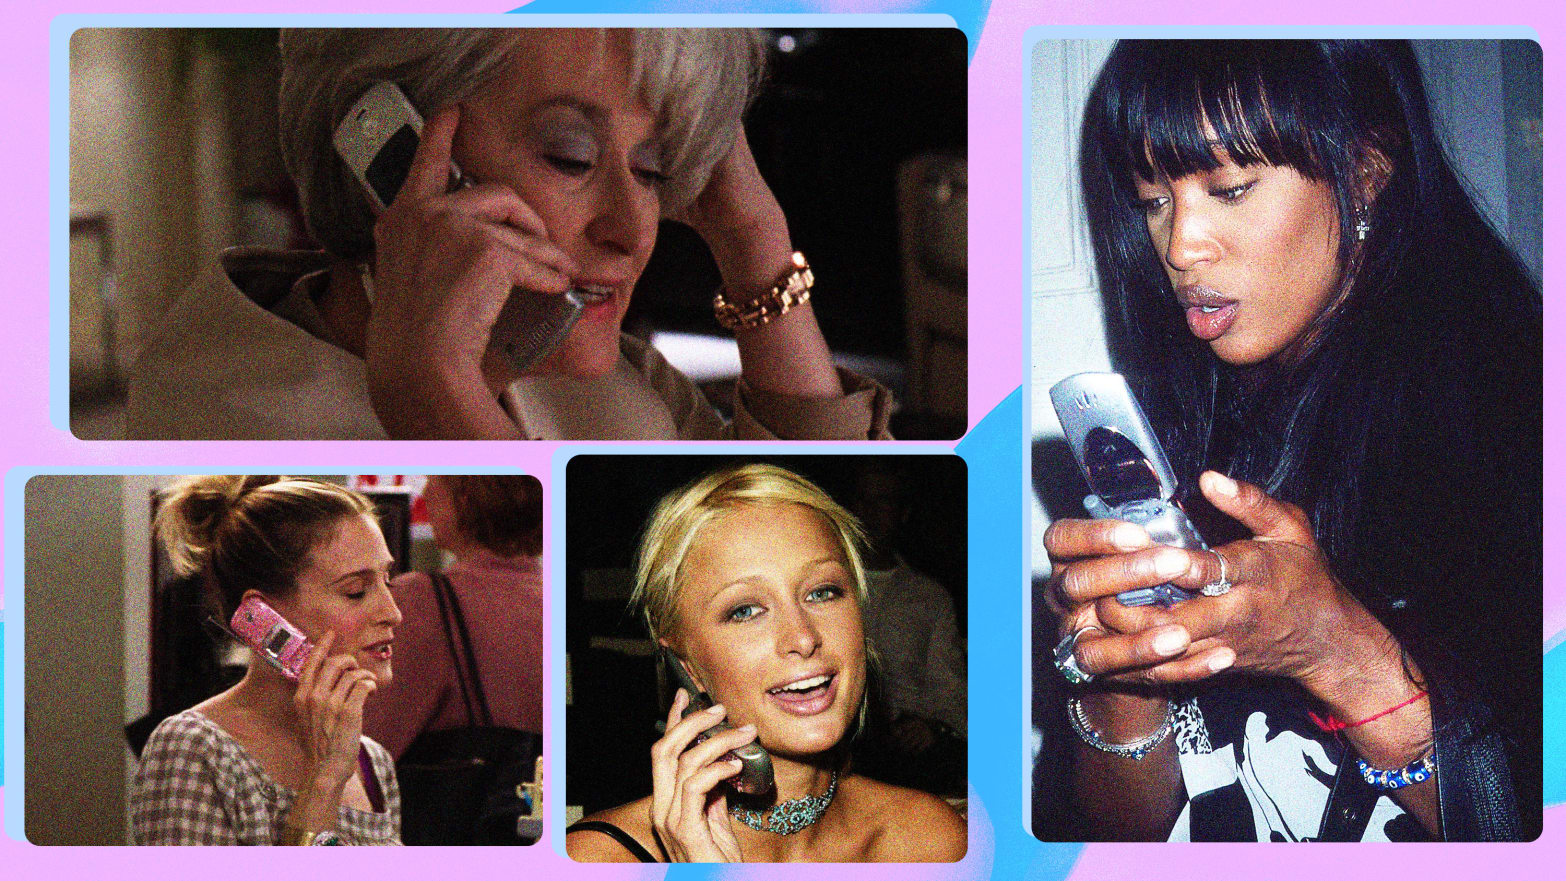  A photo illustration showing celebrities and actresses with girly cell phones circa 2000.